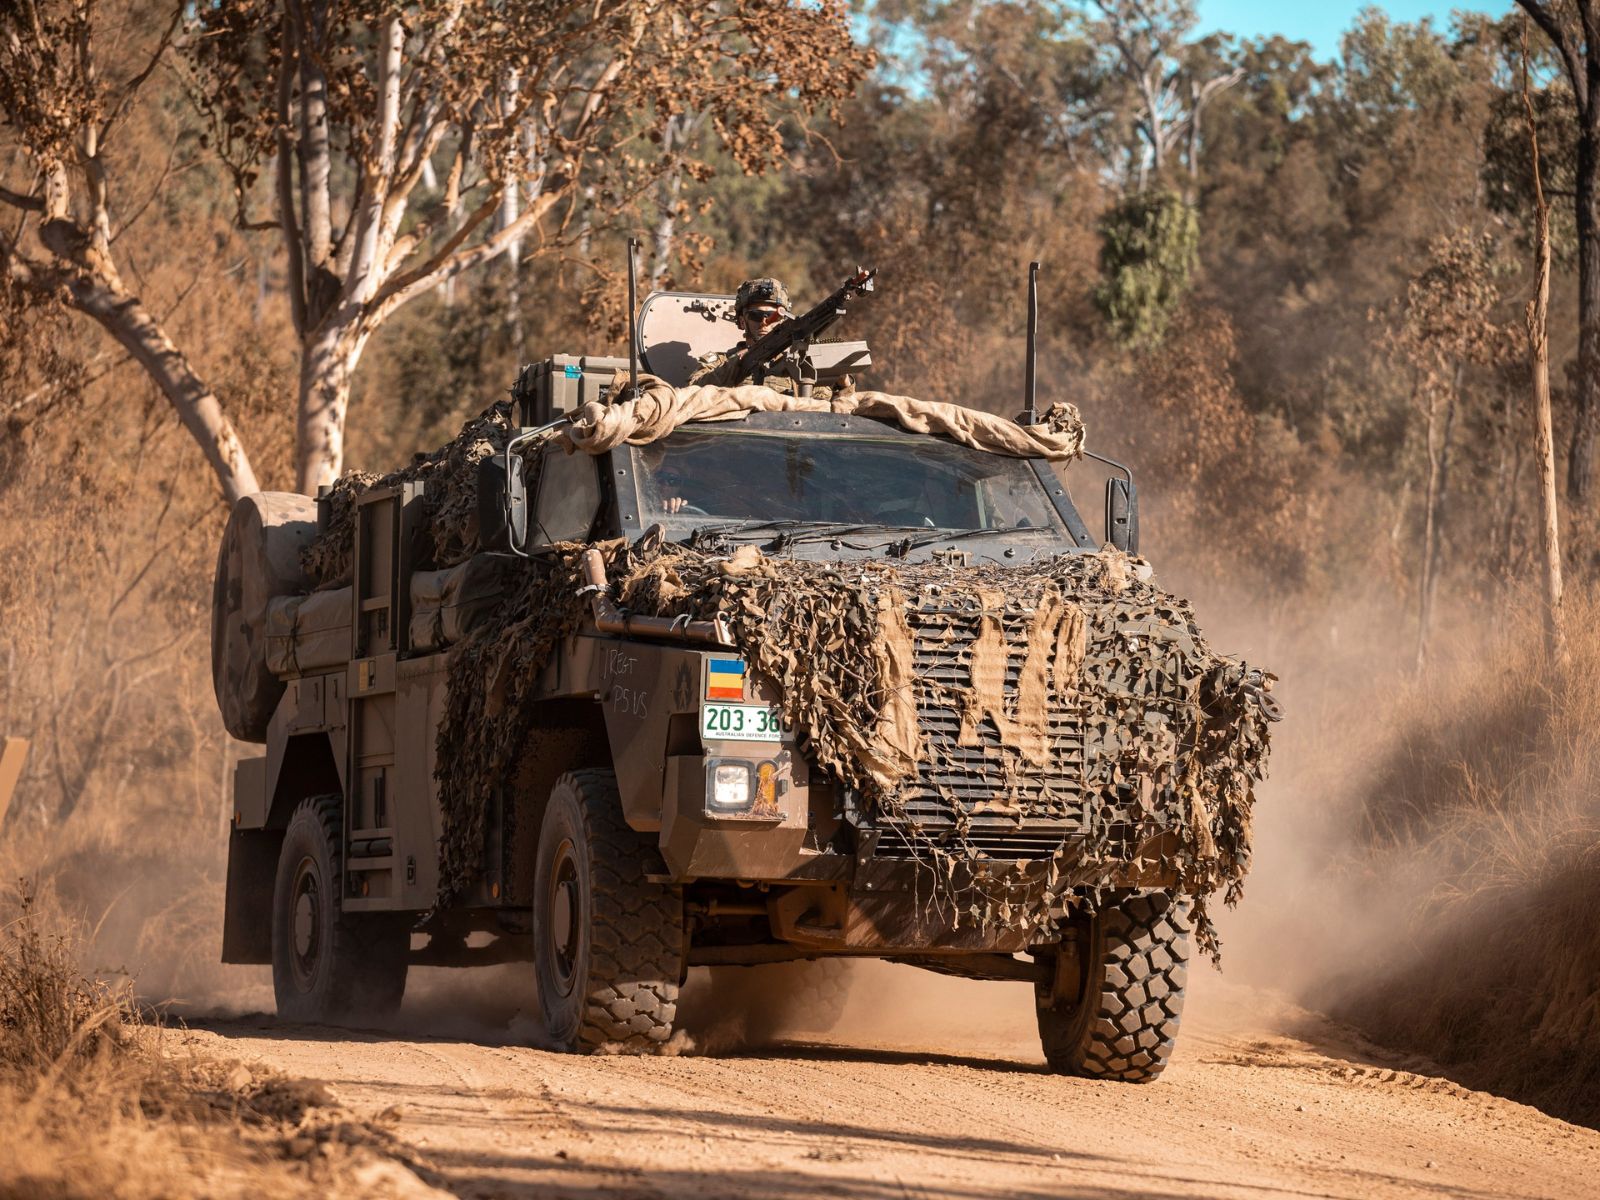 The Bushmaster infantry mobility vehicle is a success story of Australian science and technology innovation with DSTG researchers directly involved in its development since the early 2000s. It was back in 2004 that Dr Stephen Cimpoeru and his team tested and evaluated a range of protective accessories and rapidly introduced them into service on ASLAVs and Bushmaster infantry mobility vehicles. The vehicles continue to play a pivotal part in the Australian Defence Force.